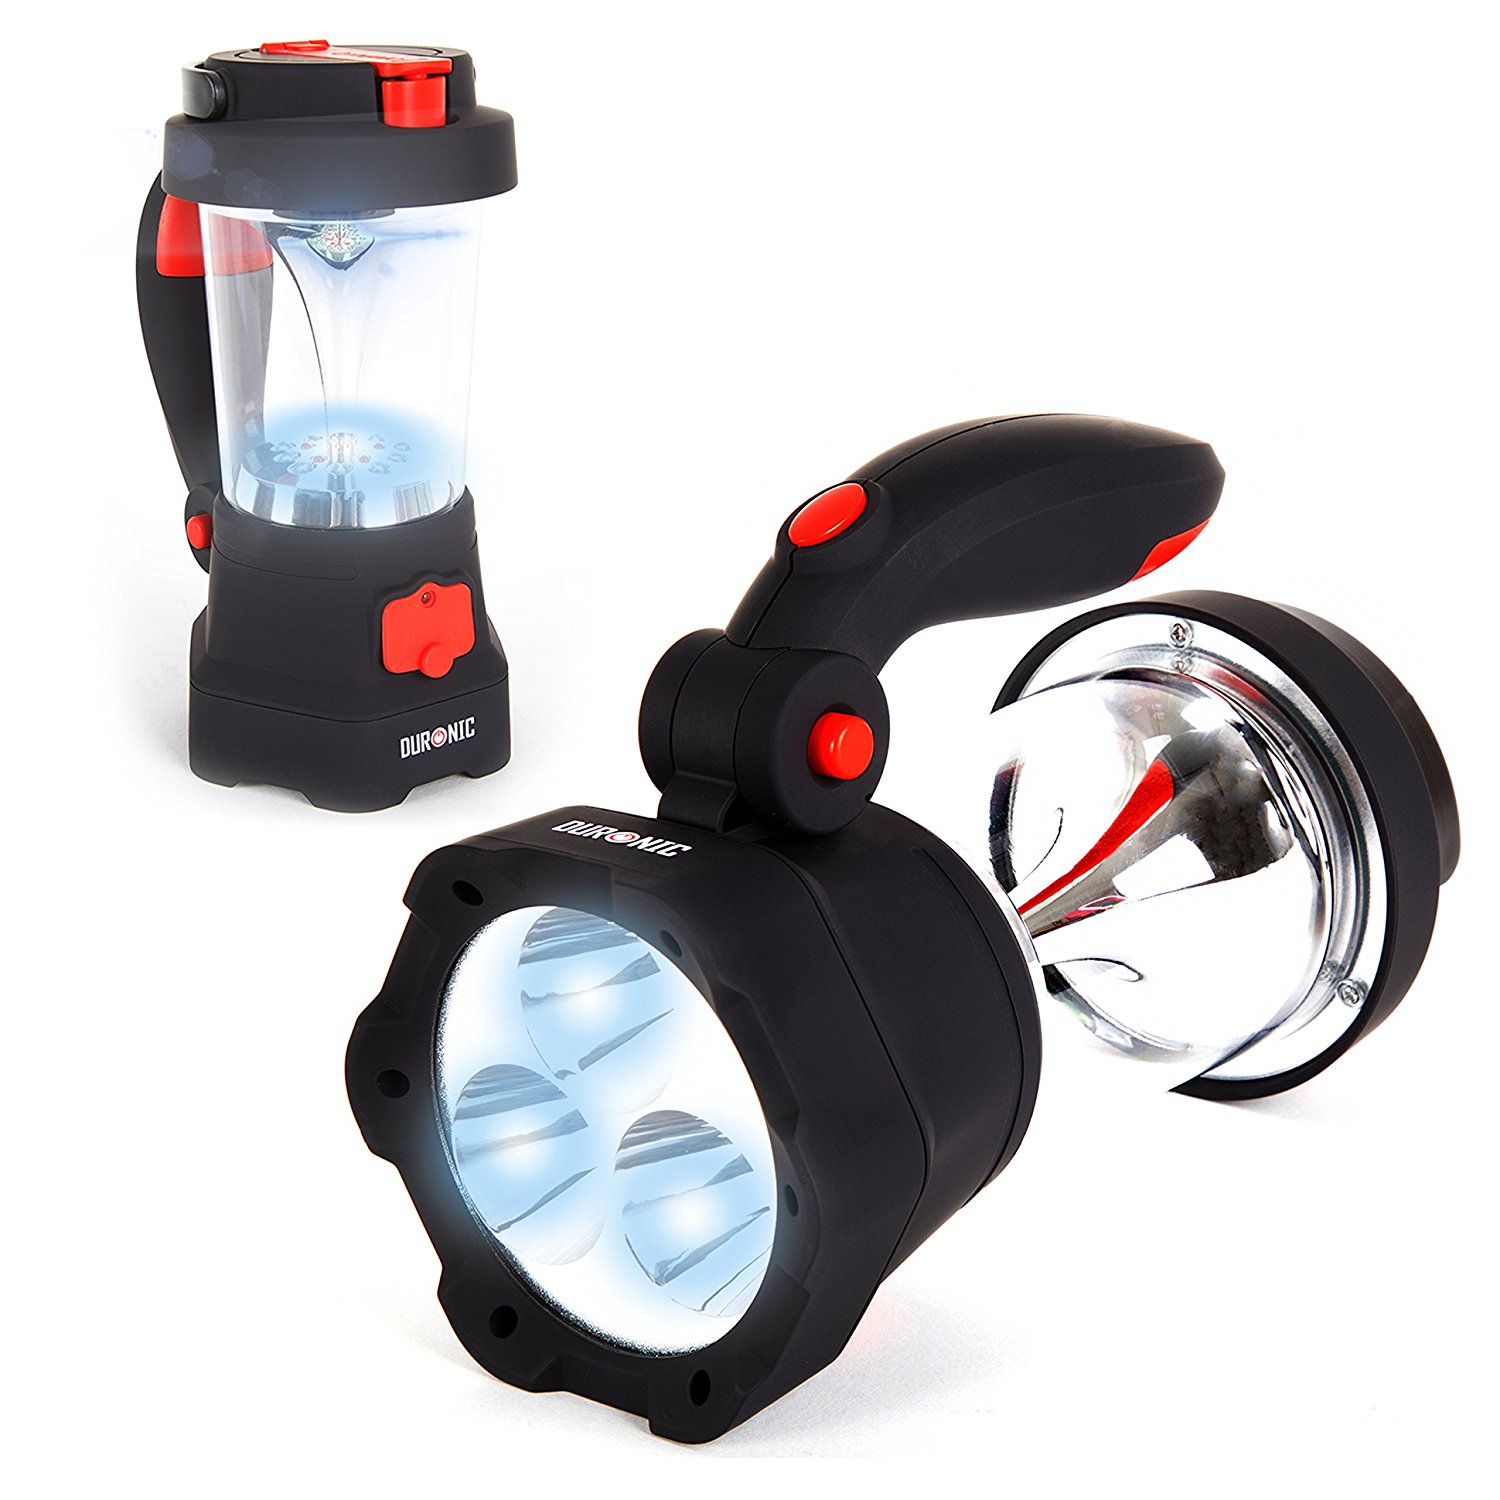  Duronic Hurricane 4 in 1 Rechargeable, Hand Crank,  Self-Powered, Dynamo Flashlight, Torch, Lamp, Lantern - USB Charging  Function : Sports & Outdoors